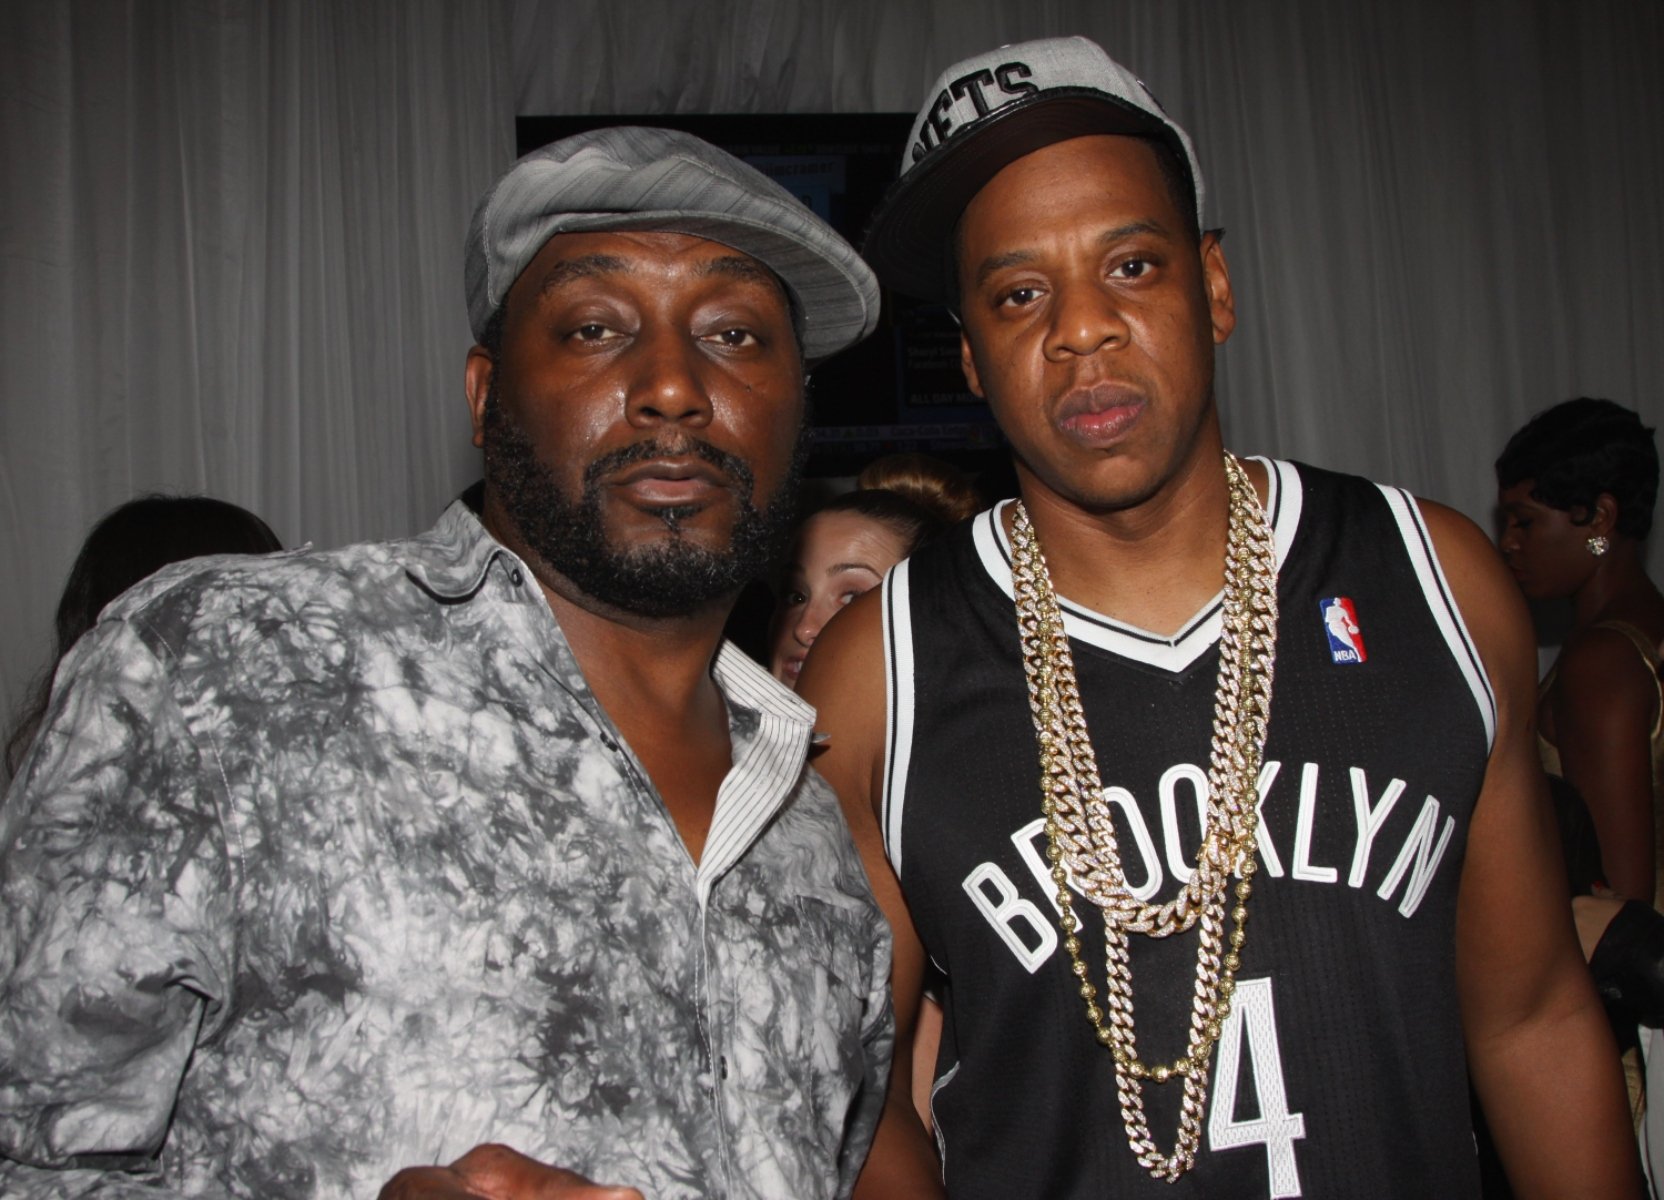 Big Daddy Kane and Jay-Z at Barclays Center on September 28, 2012